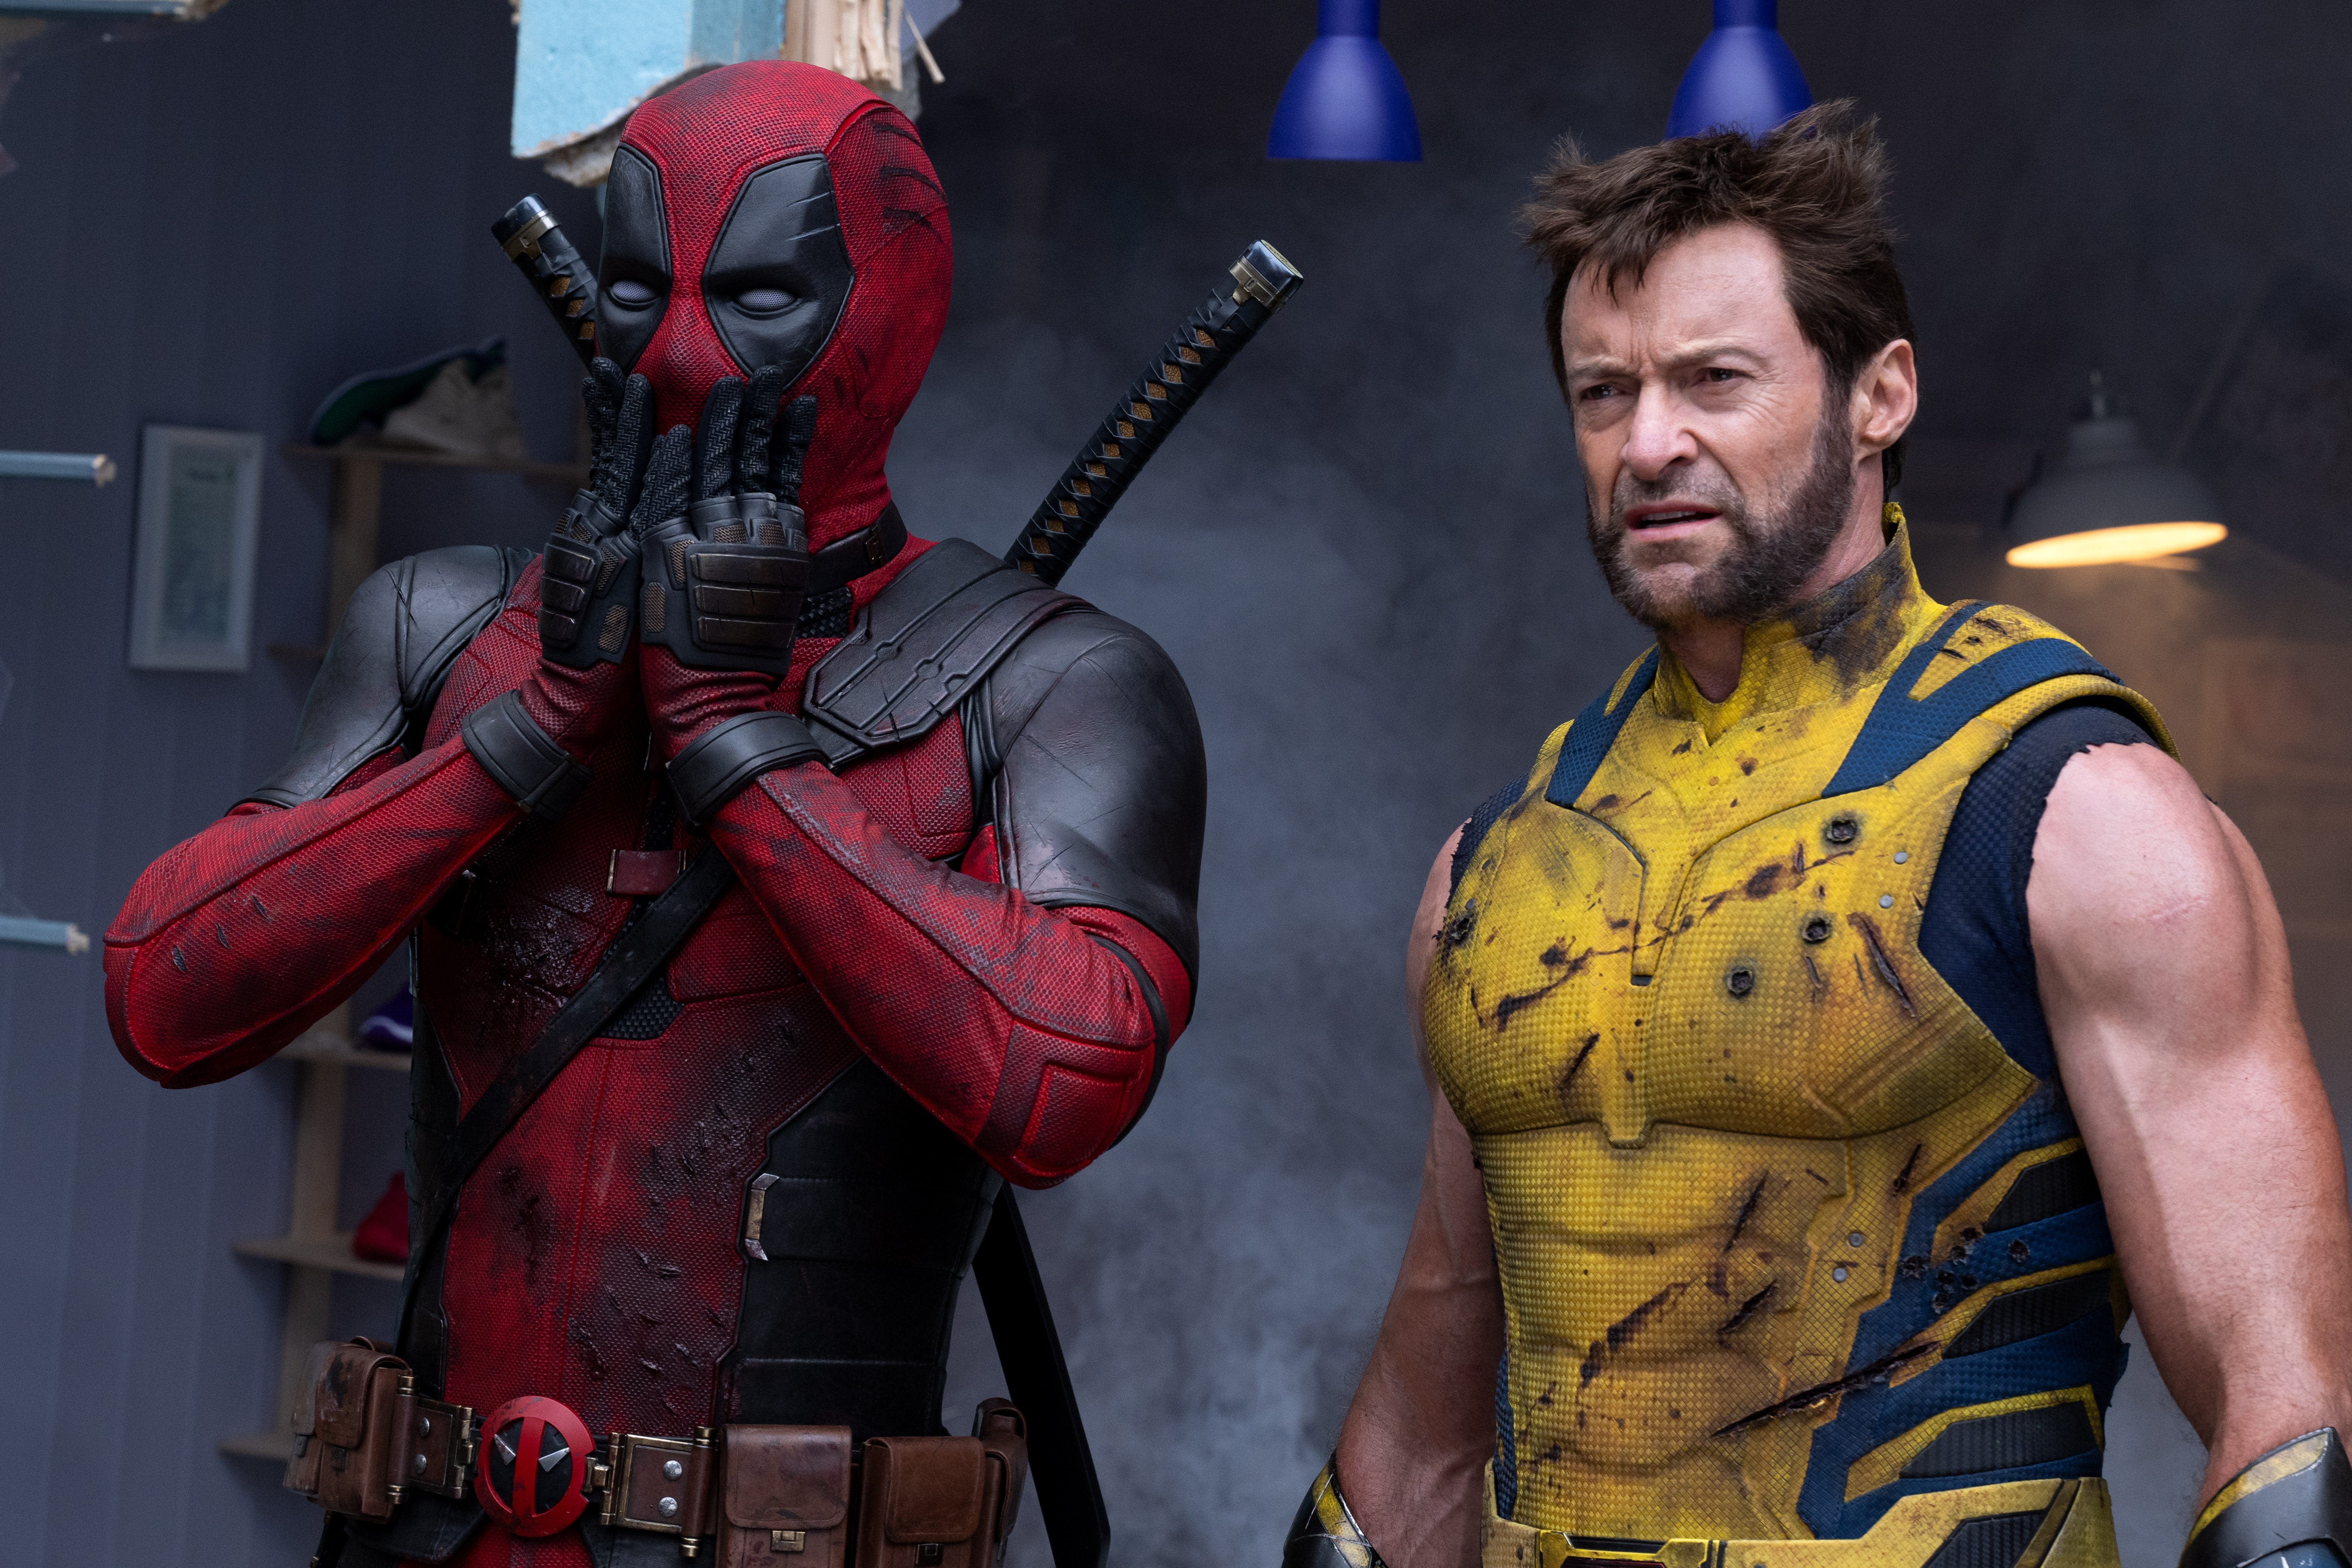 'Deadpool and Wolverine' popcorn bucket to hit Cinemark theaters on July 23: How to buy